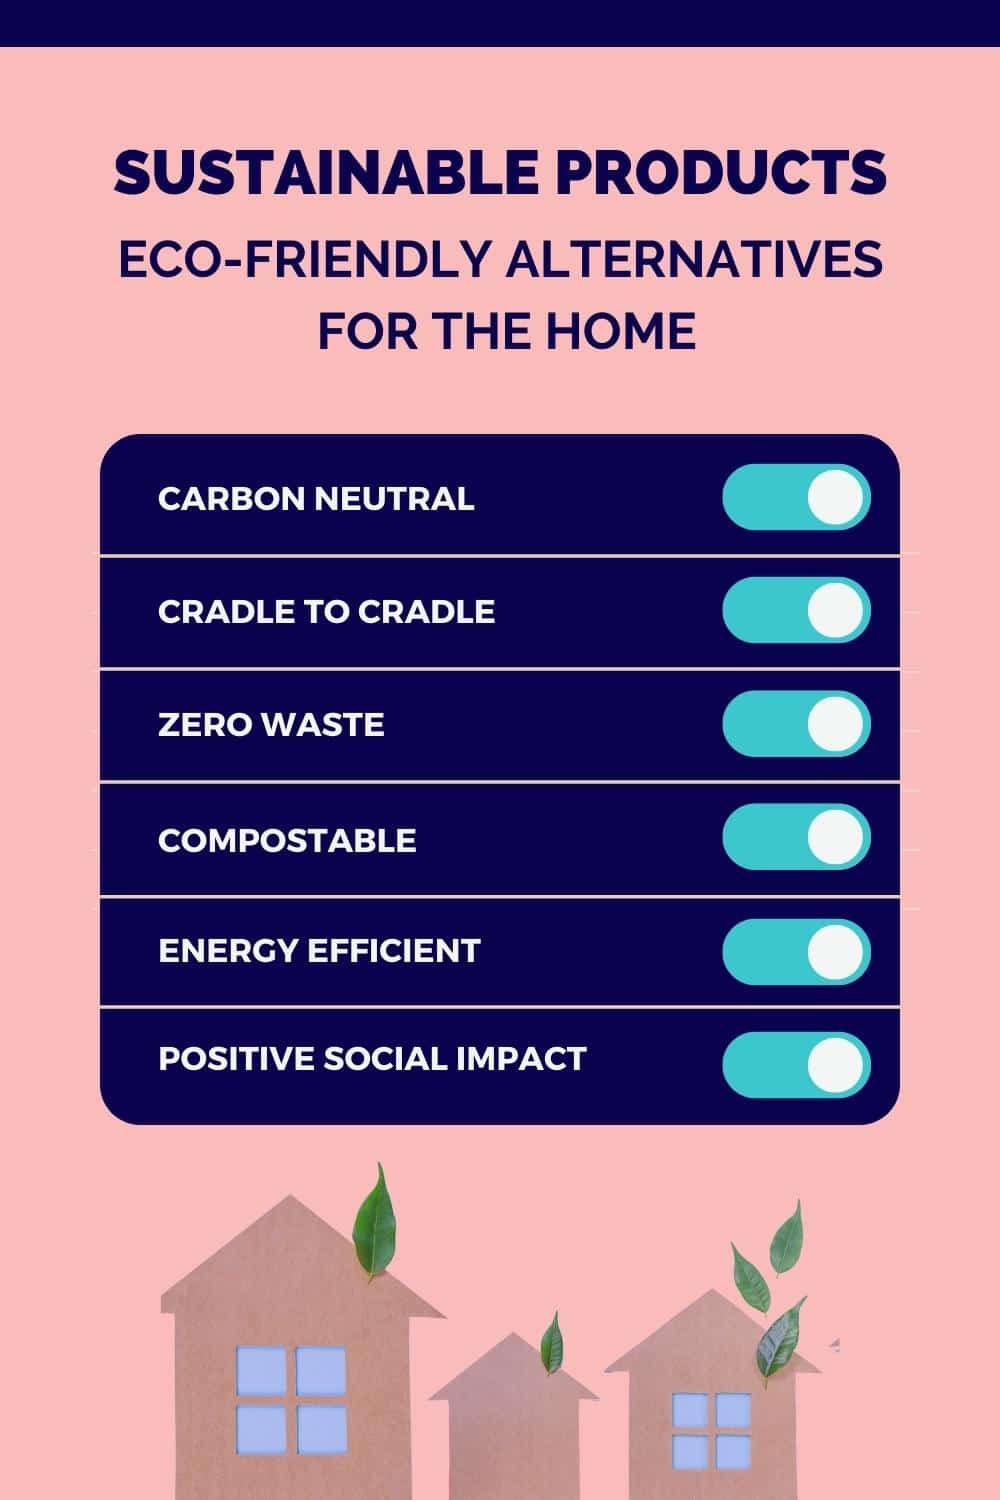 List of criteria for sustainable products including carbon neutral and zero waste.